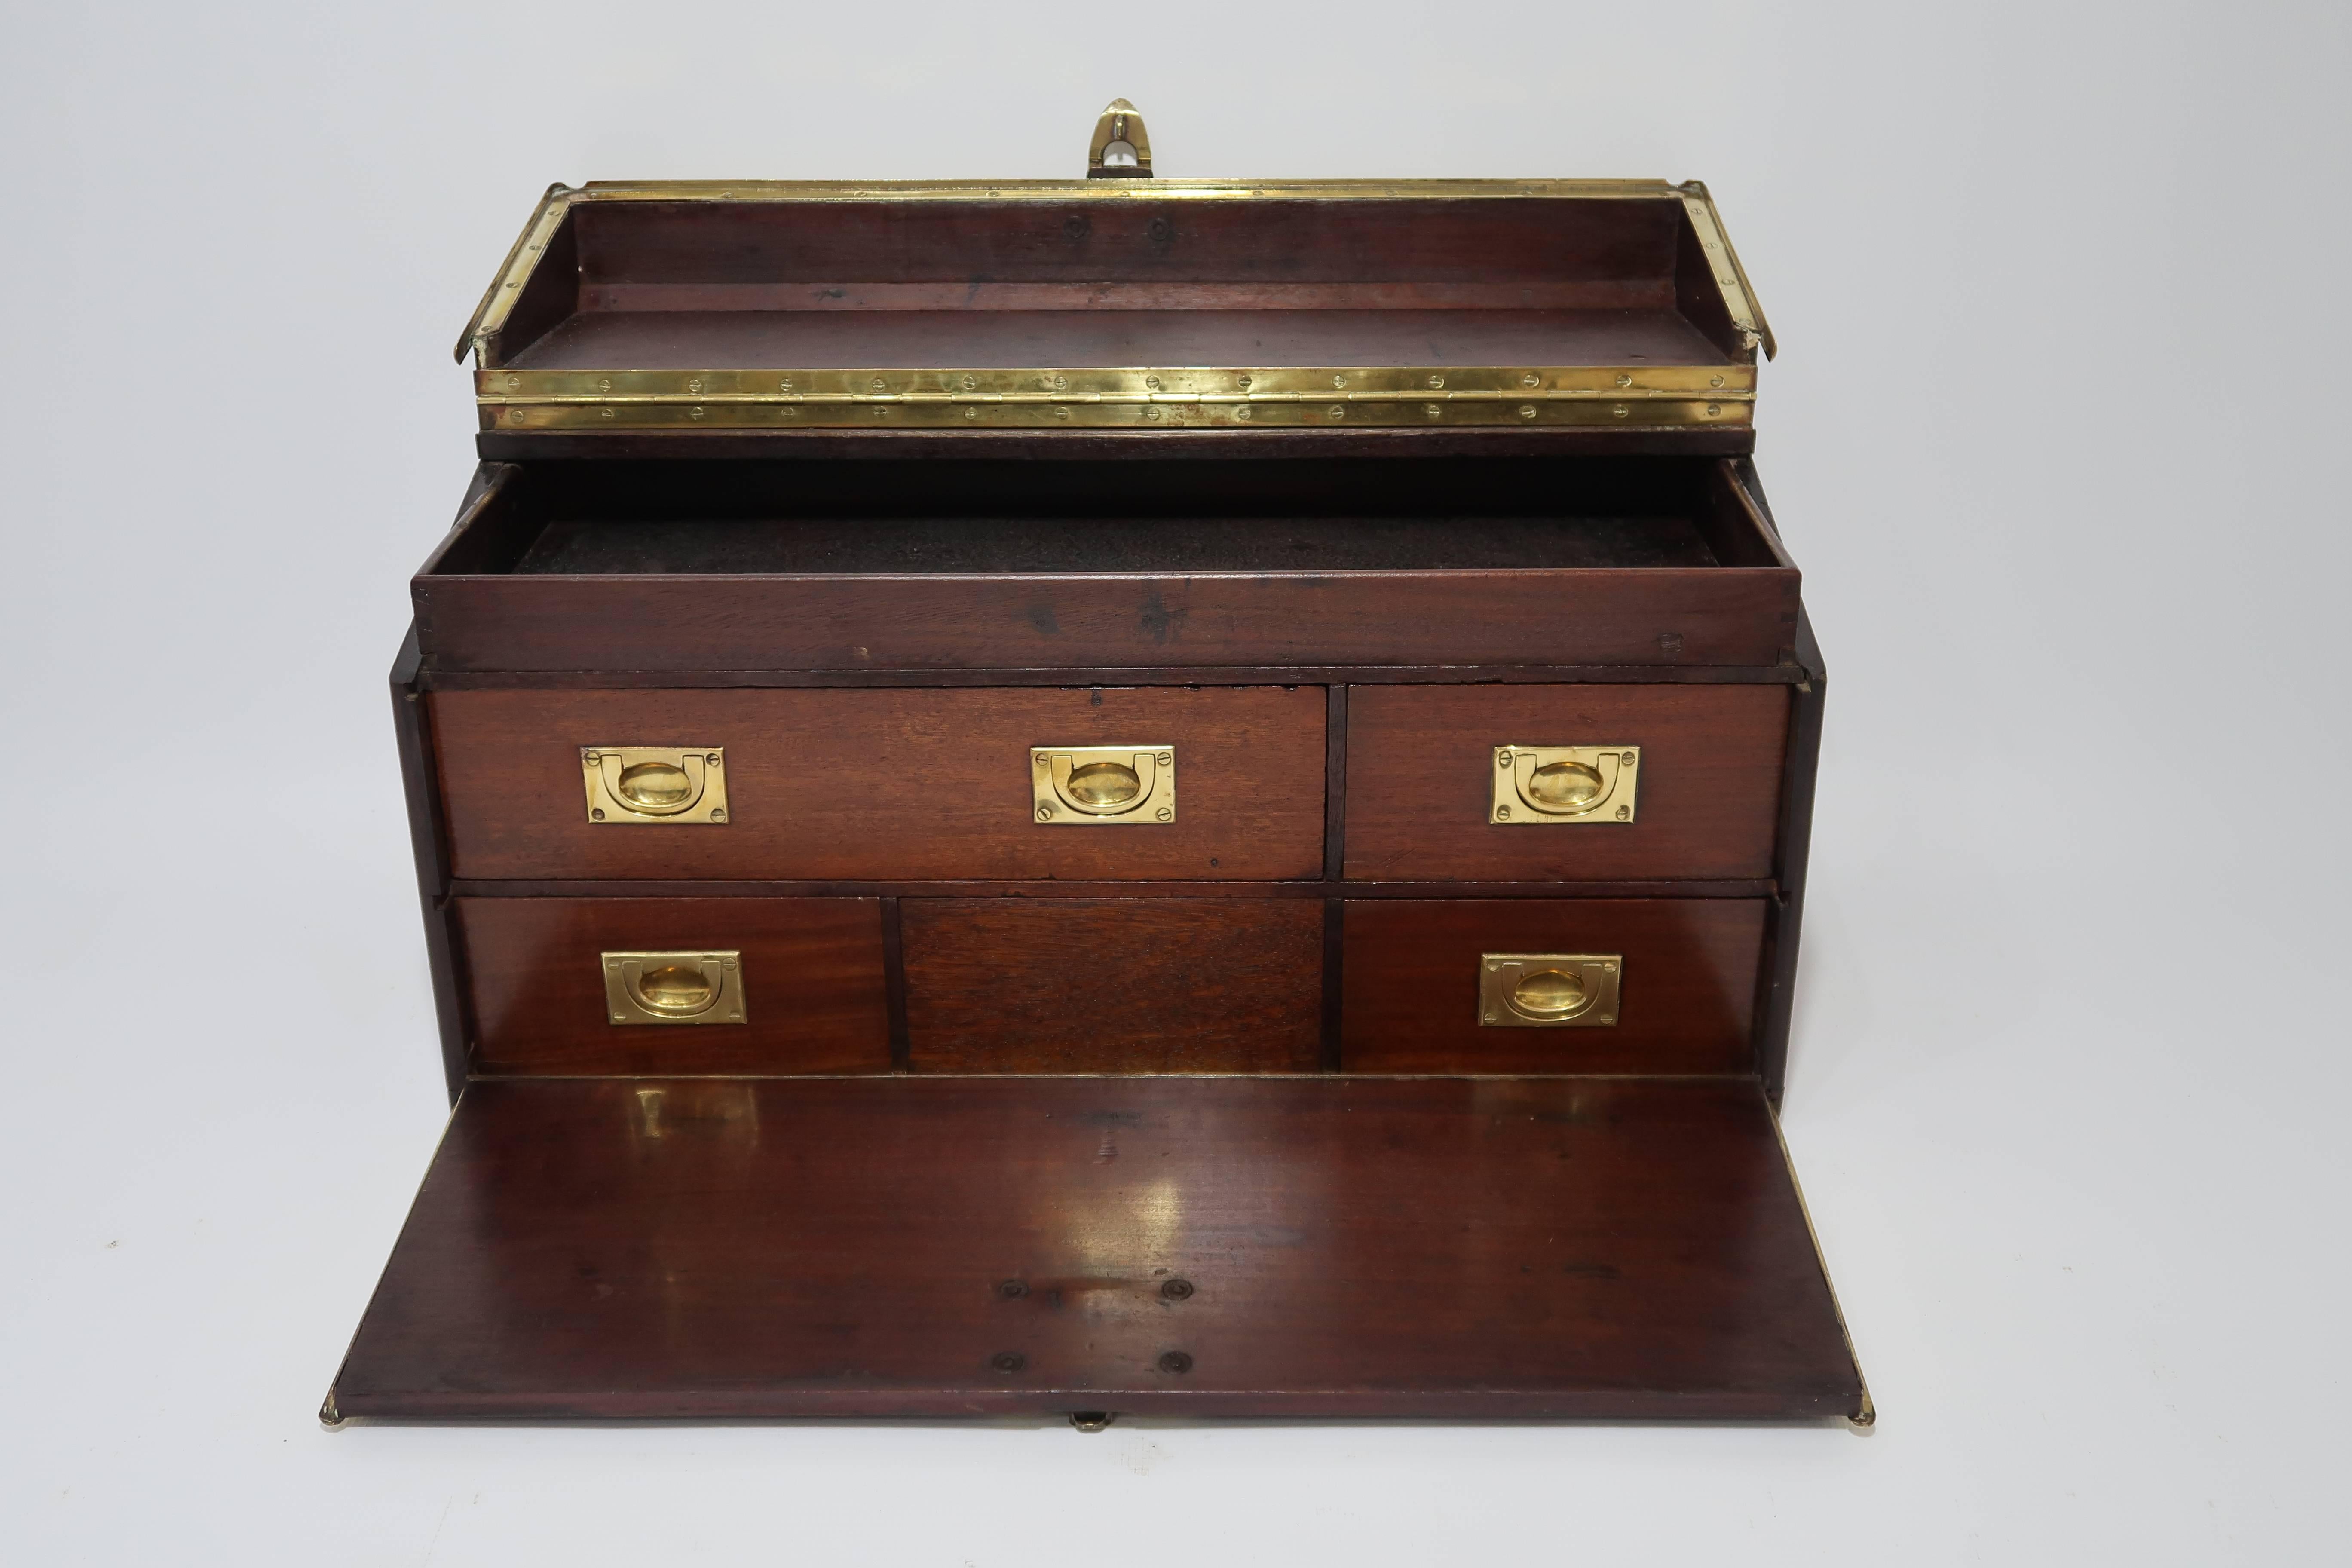 Late 19th Century 1890s Louis Vuitton Wooden Tool Box Trunk, 1 of the 100 Legendary Trunks For Sale